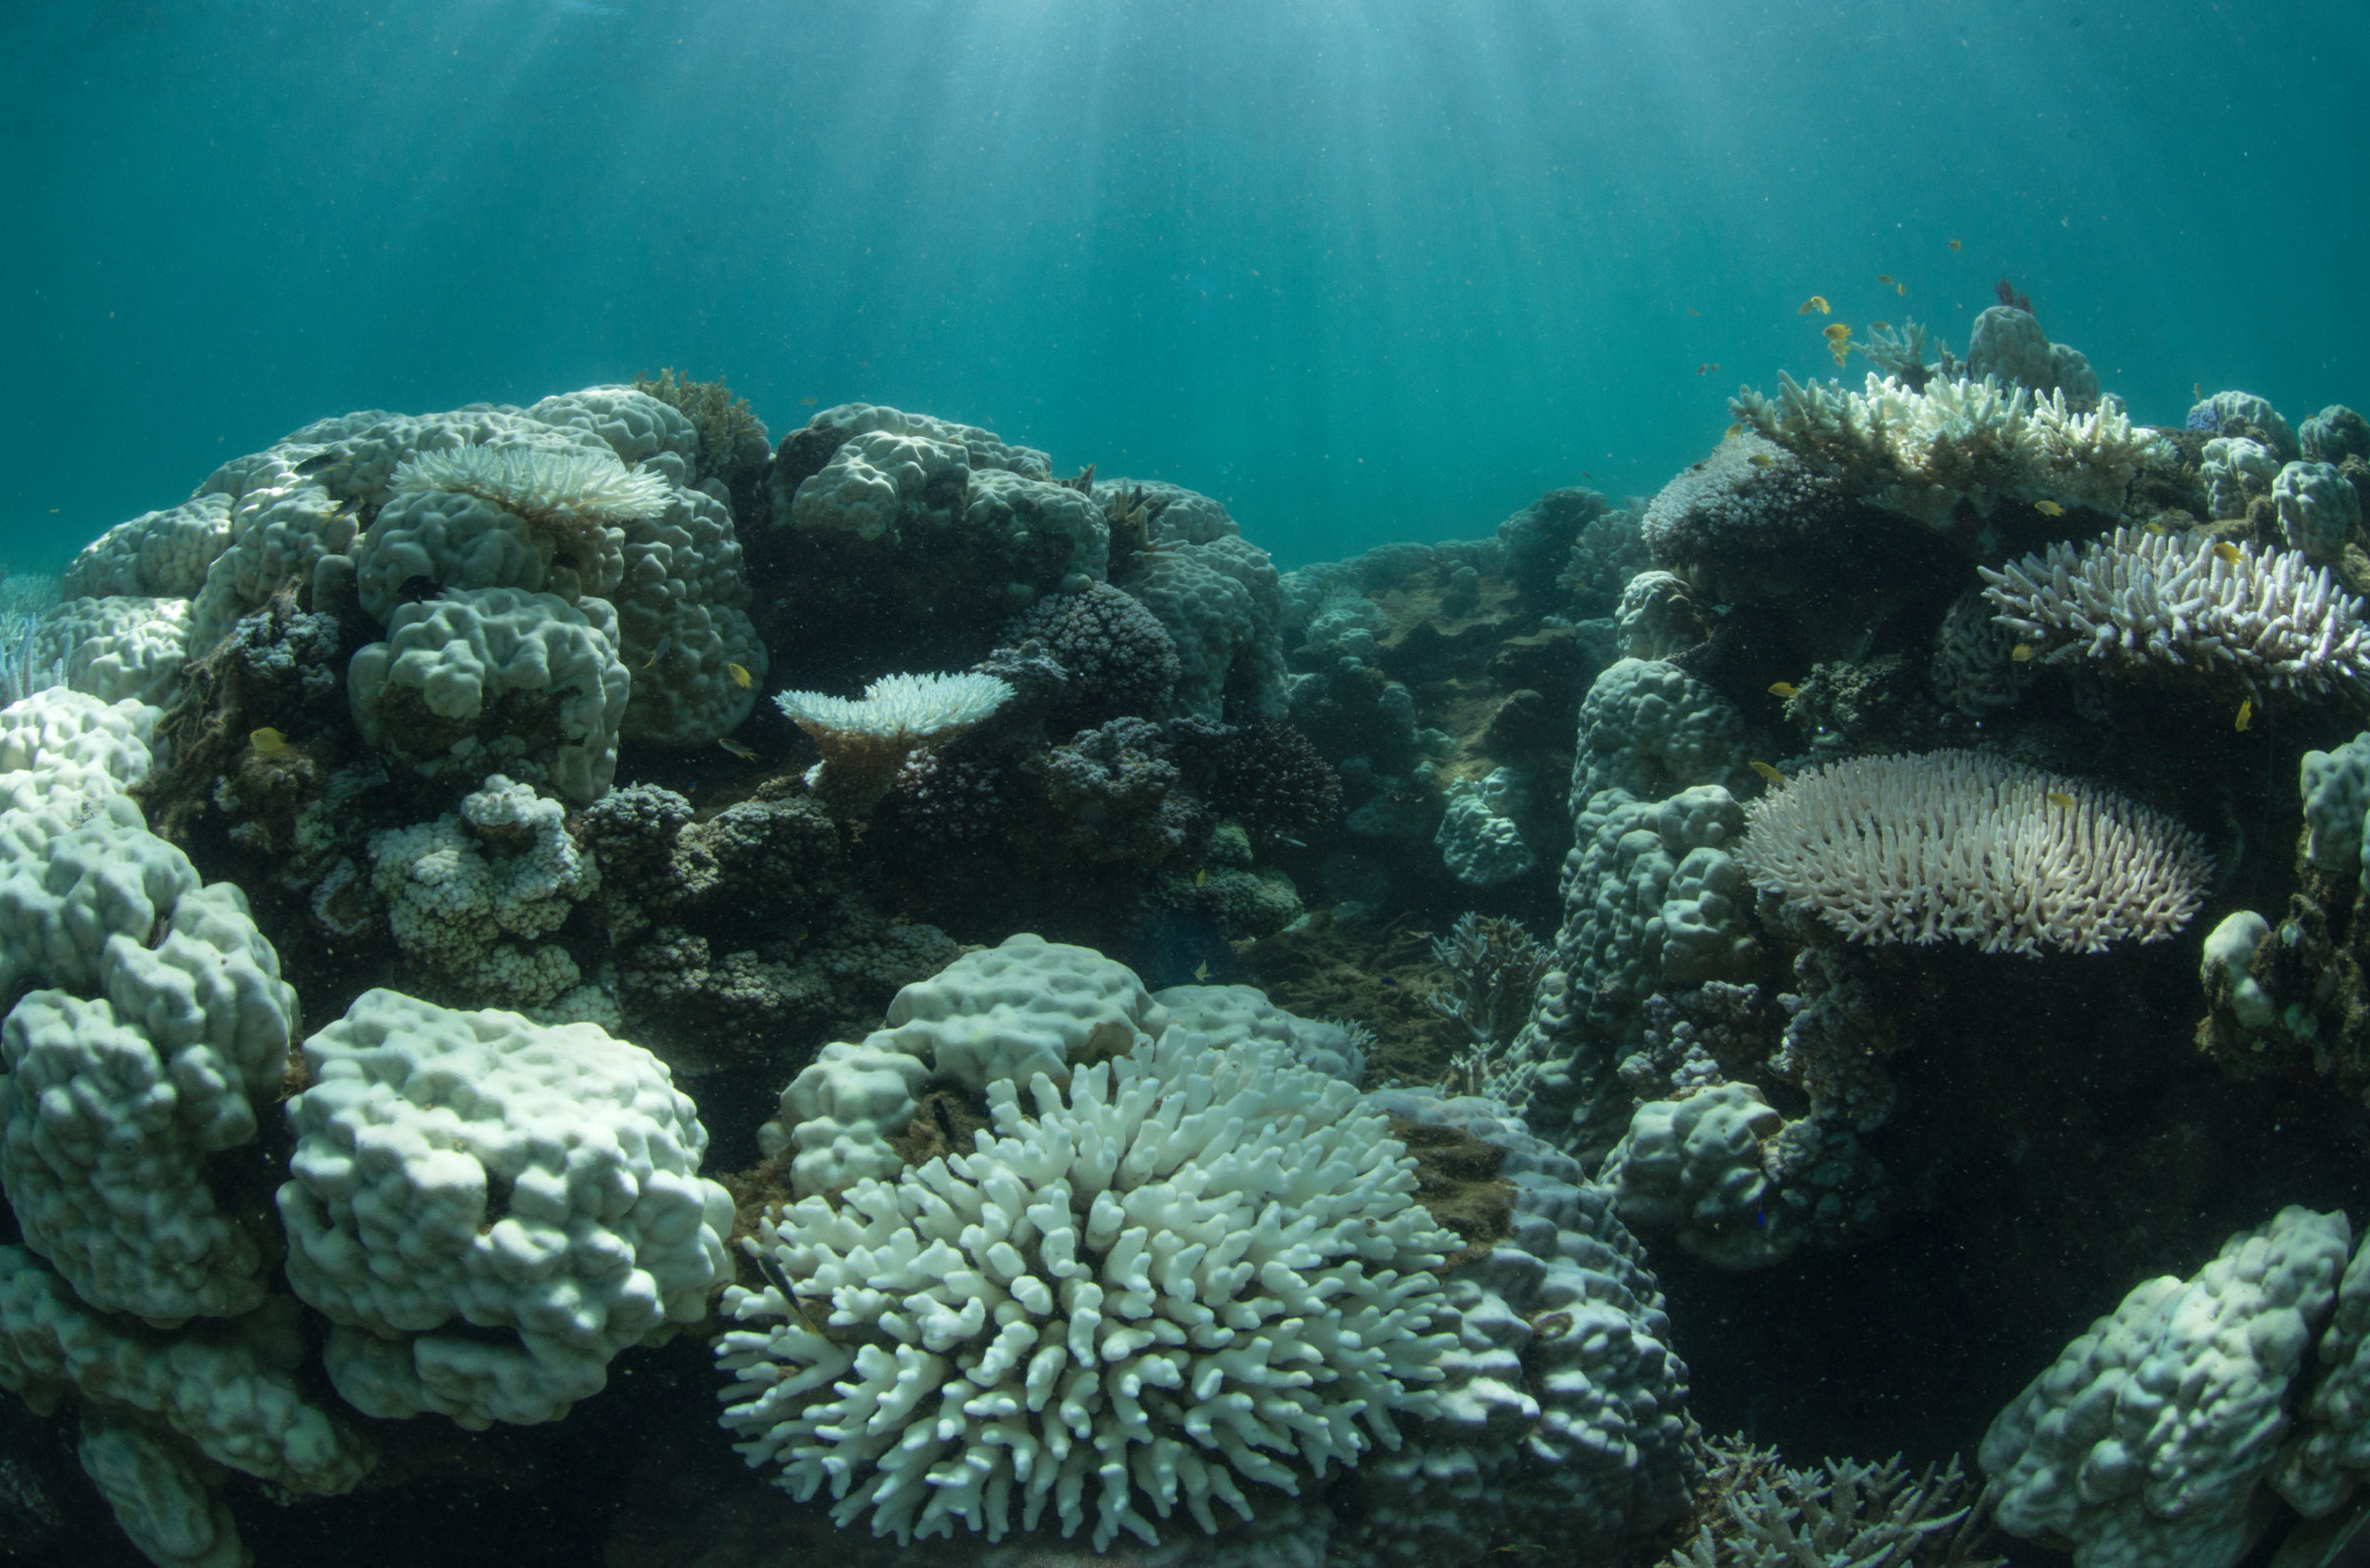 Sunscreen is bad for corals